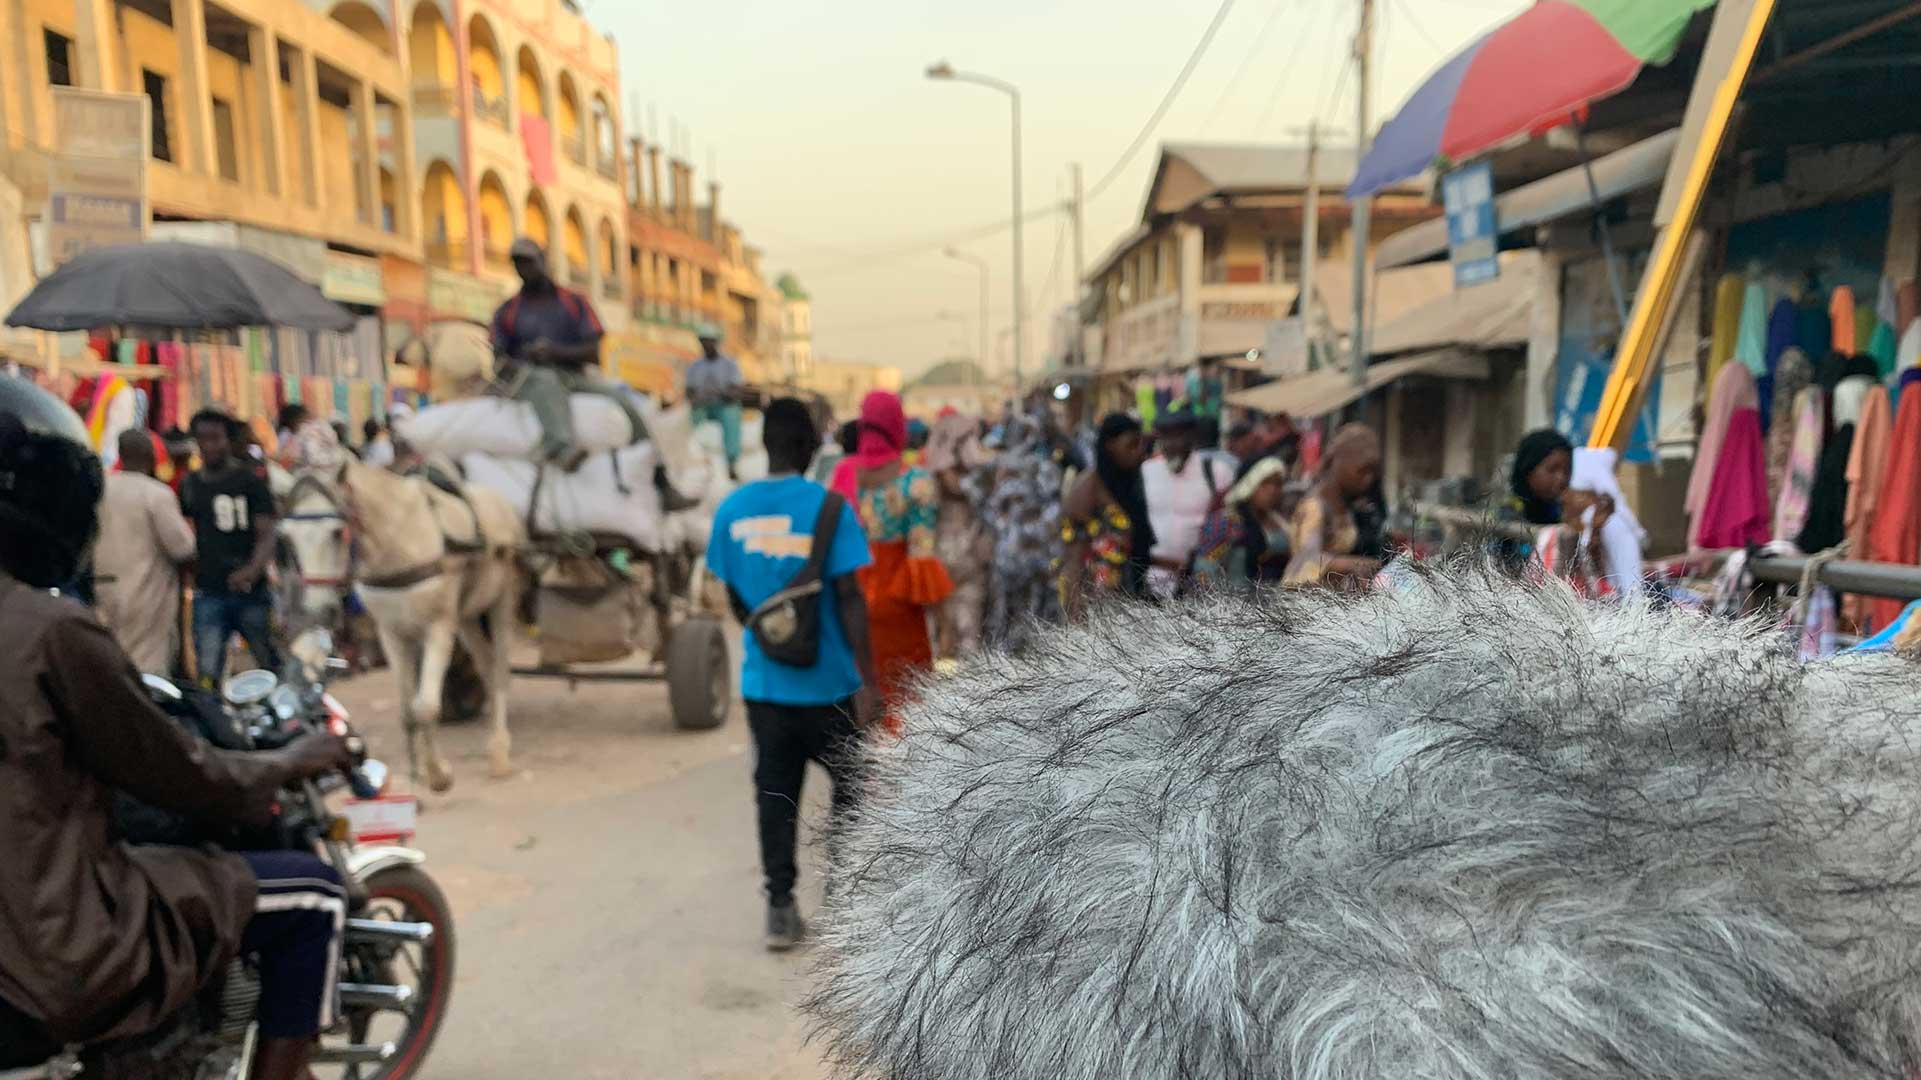 Recording in a market in The Gambia